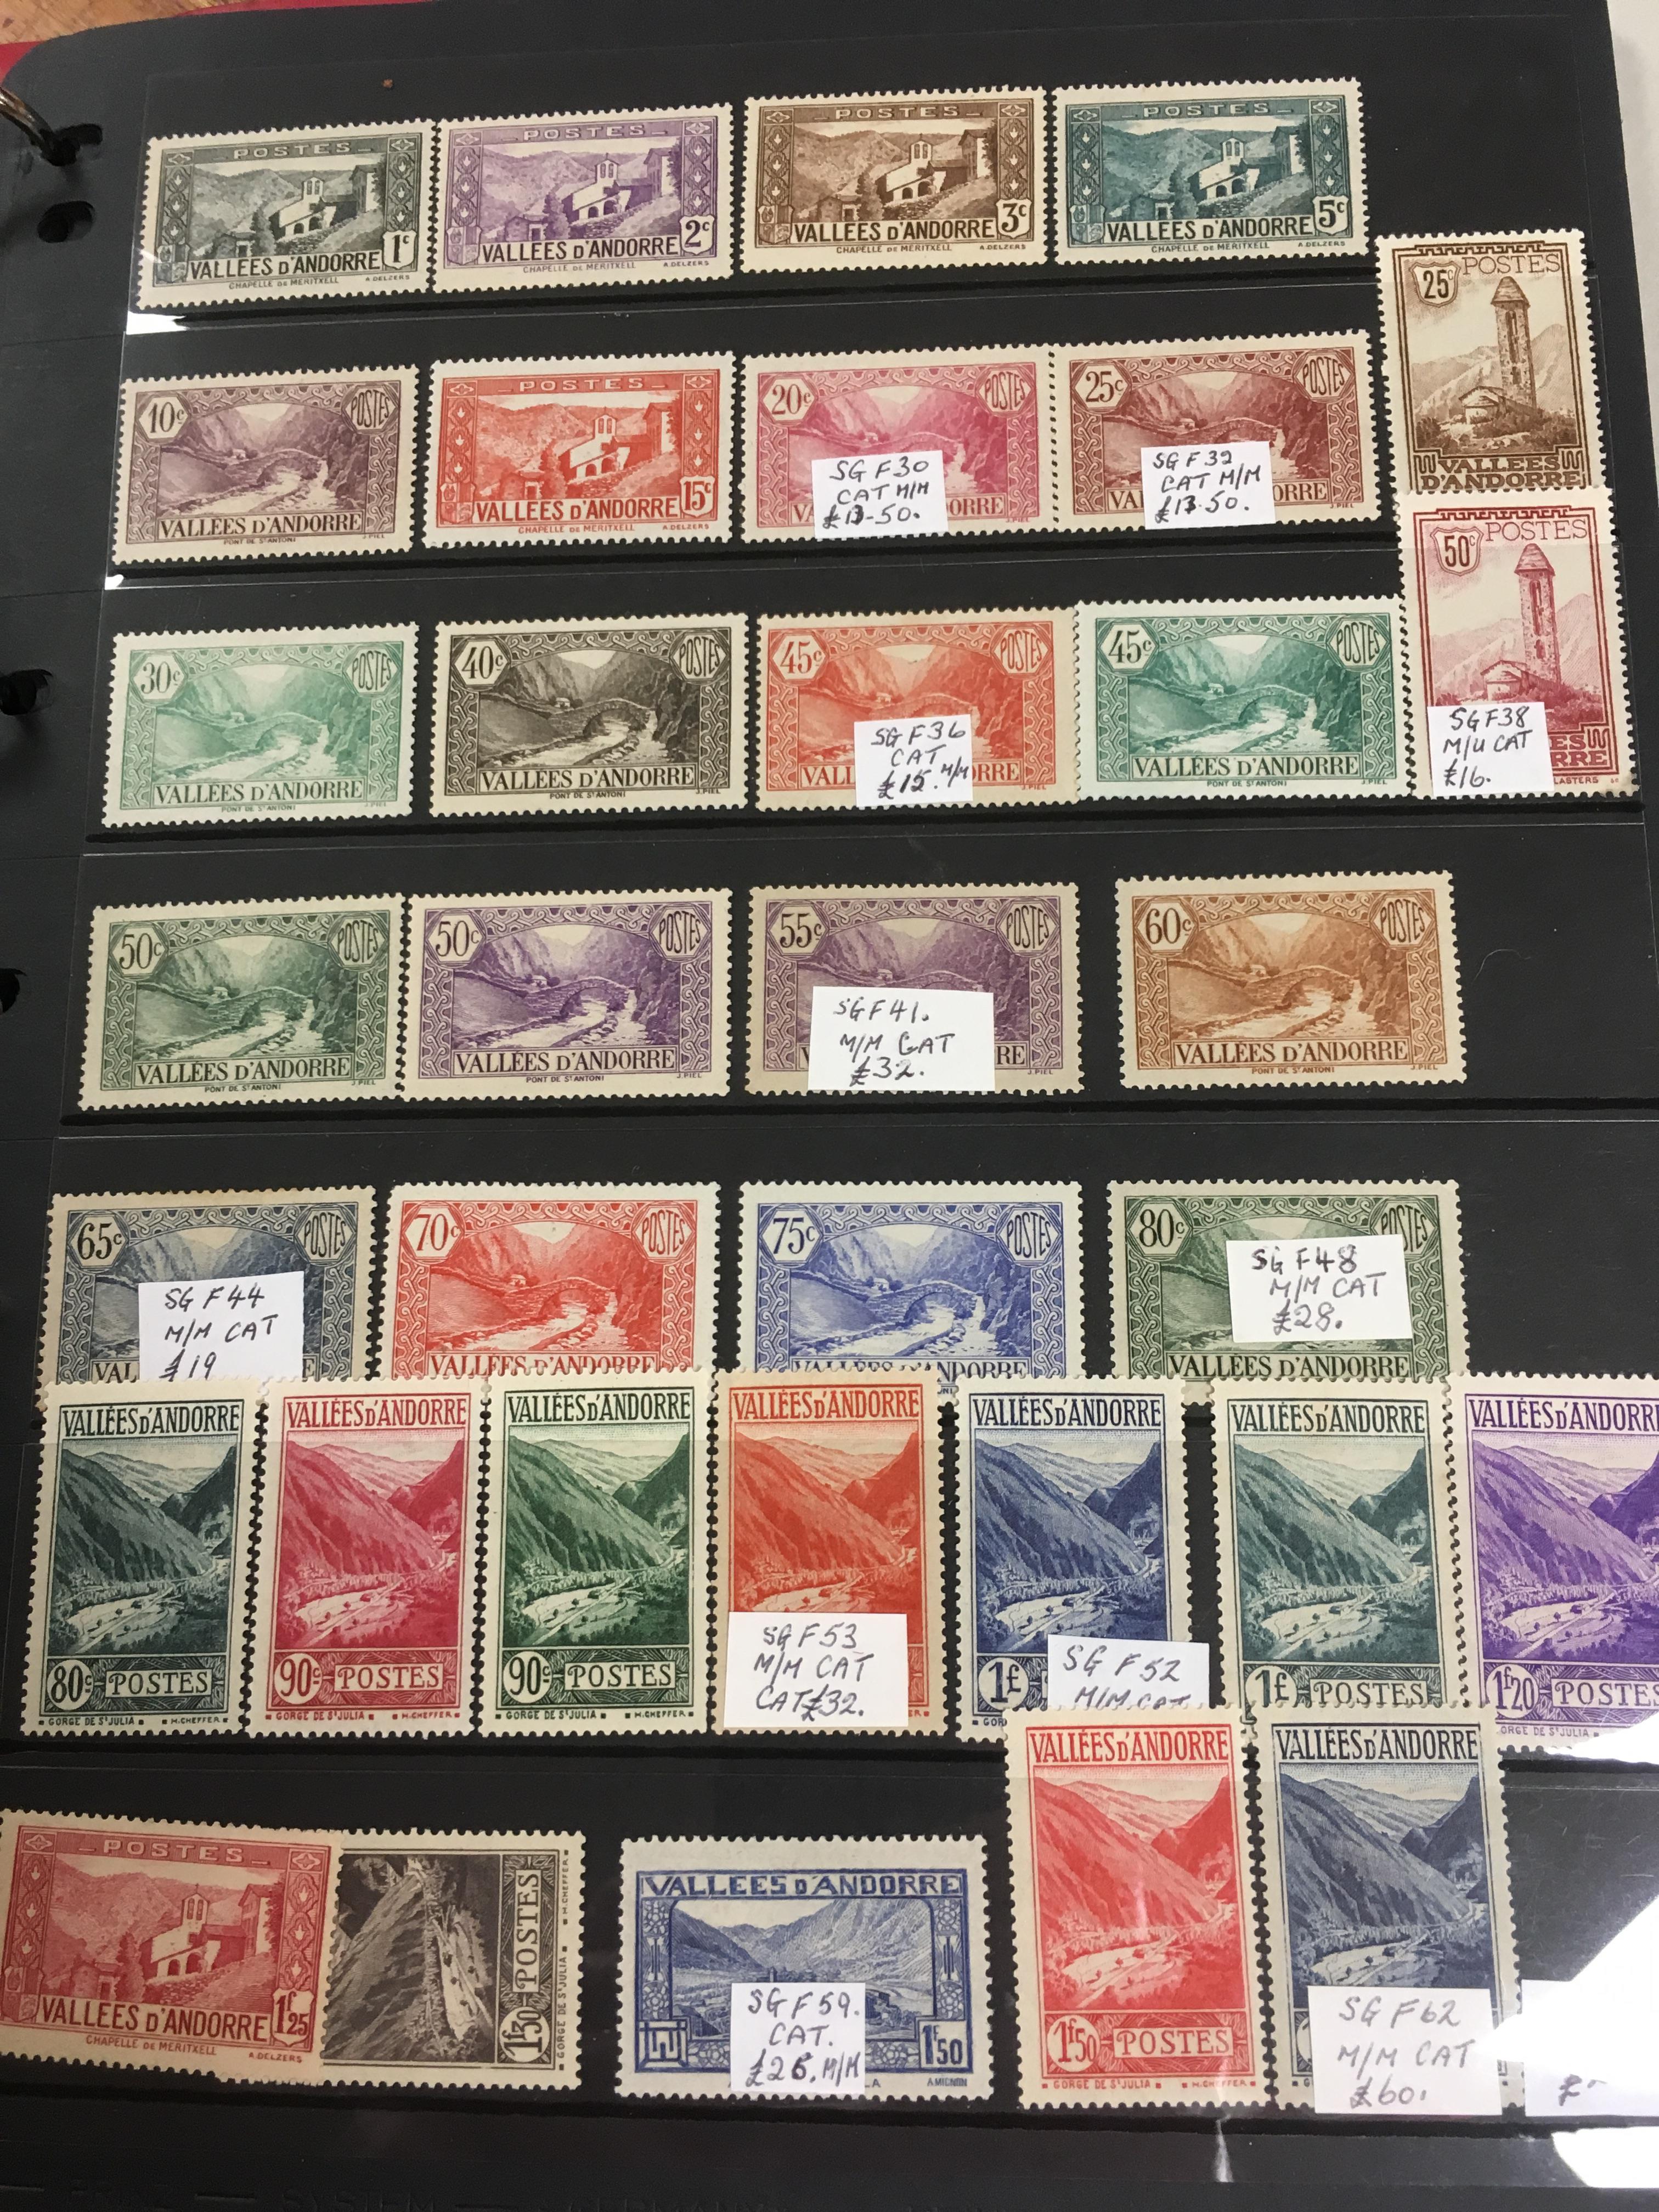 ANDORRA: 1931-2000 MIXED MINT AND USED FRENCH POST OFFICES COLLECTION IN A BINDER, BETTER ITEMS ANNO - Image 2 of 3